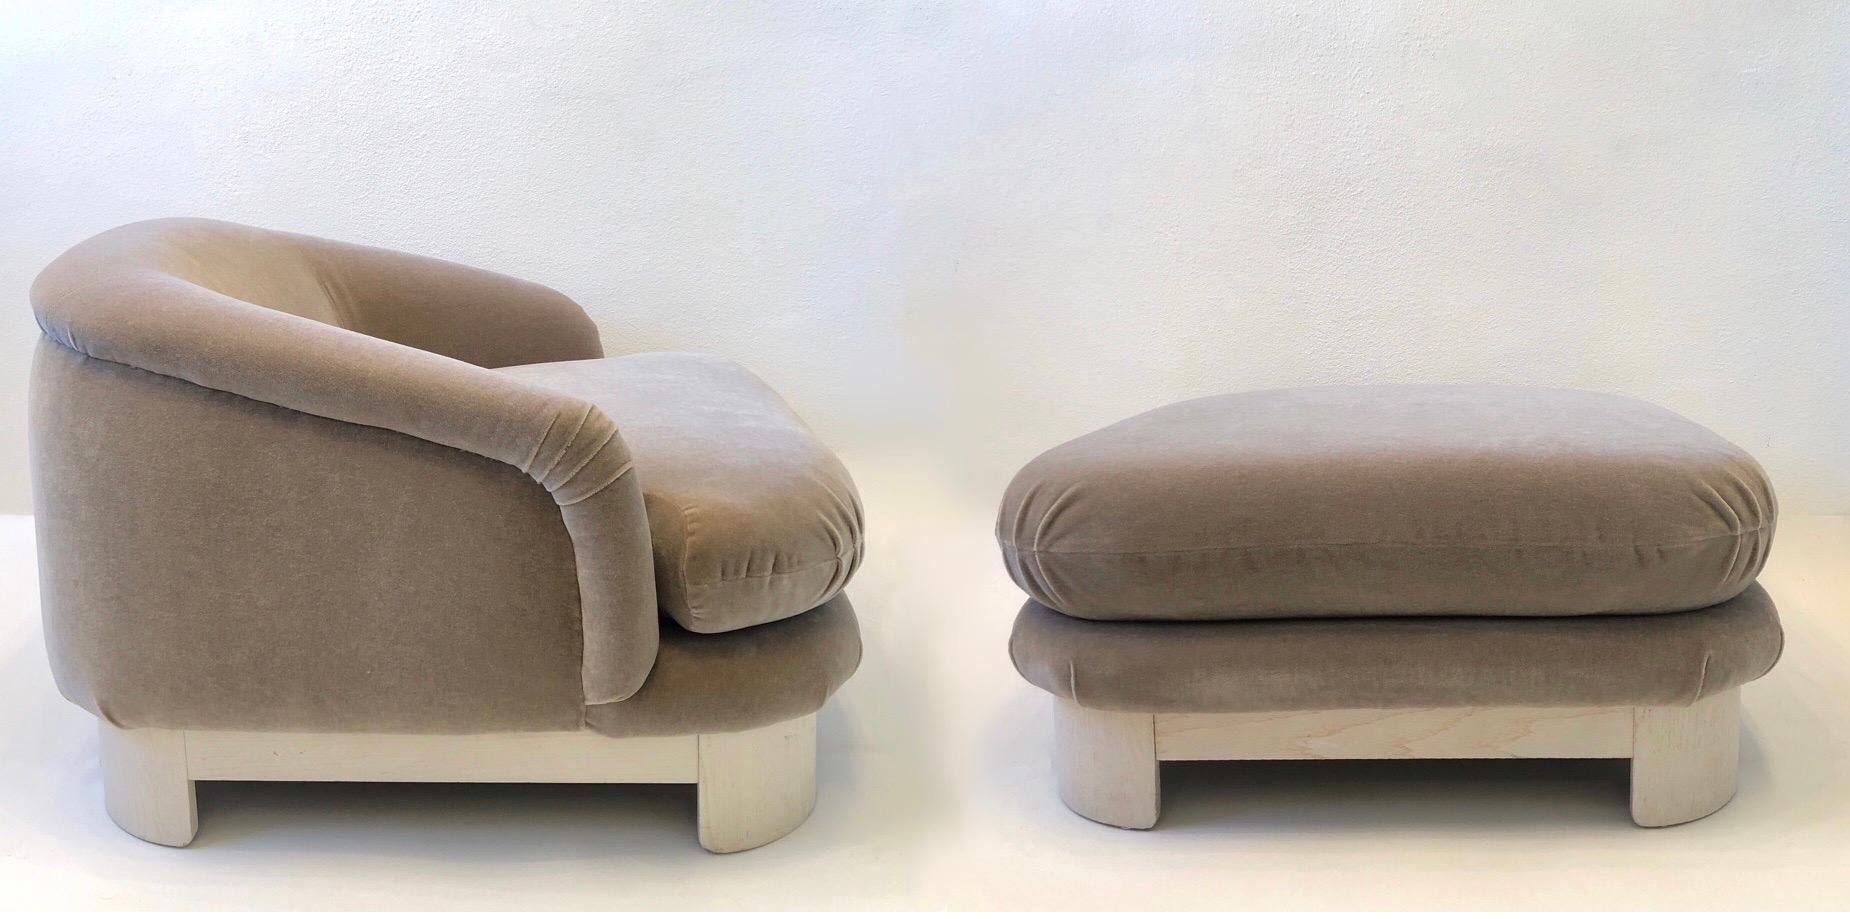 A spectacular pair of large lounge chairs and ottoman by Thayer Coggin.
This is a rare set from the 1990’s. Both chairs retain the Thayer Coggin labe.
Newly recovered in a soft off white mohair fabric, the bases are whitewash oak.